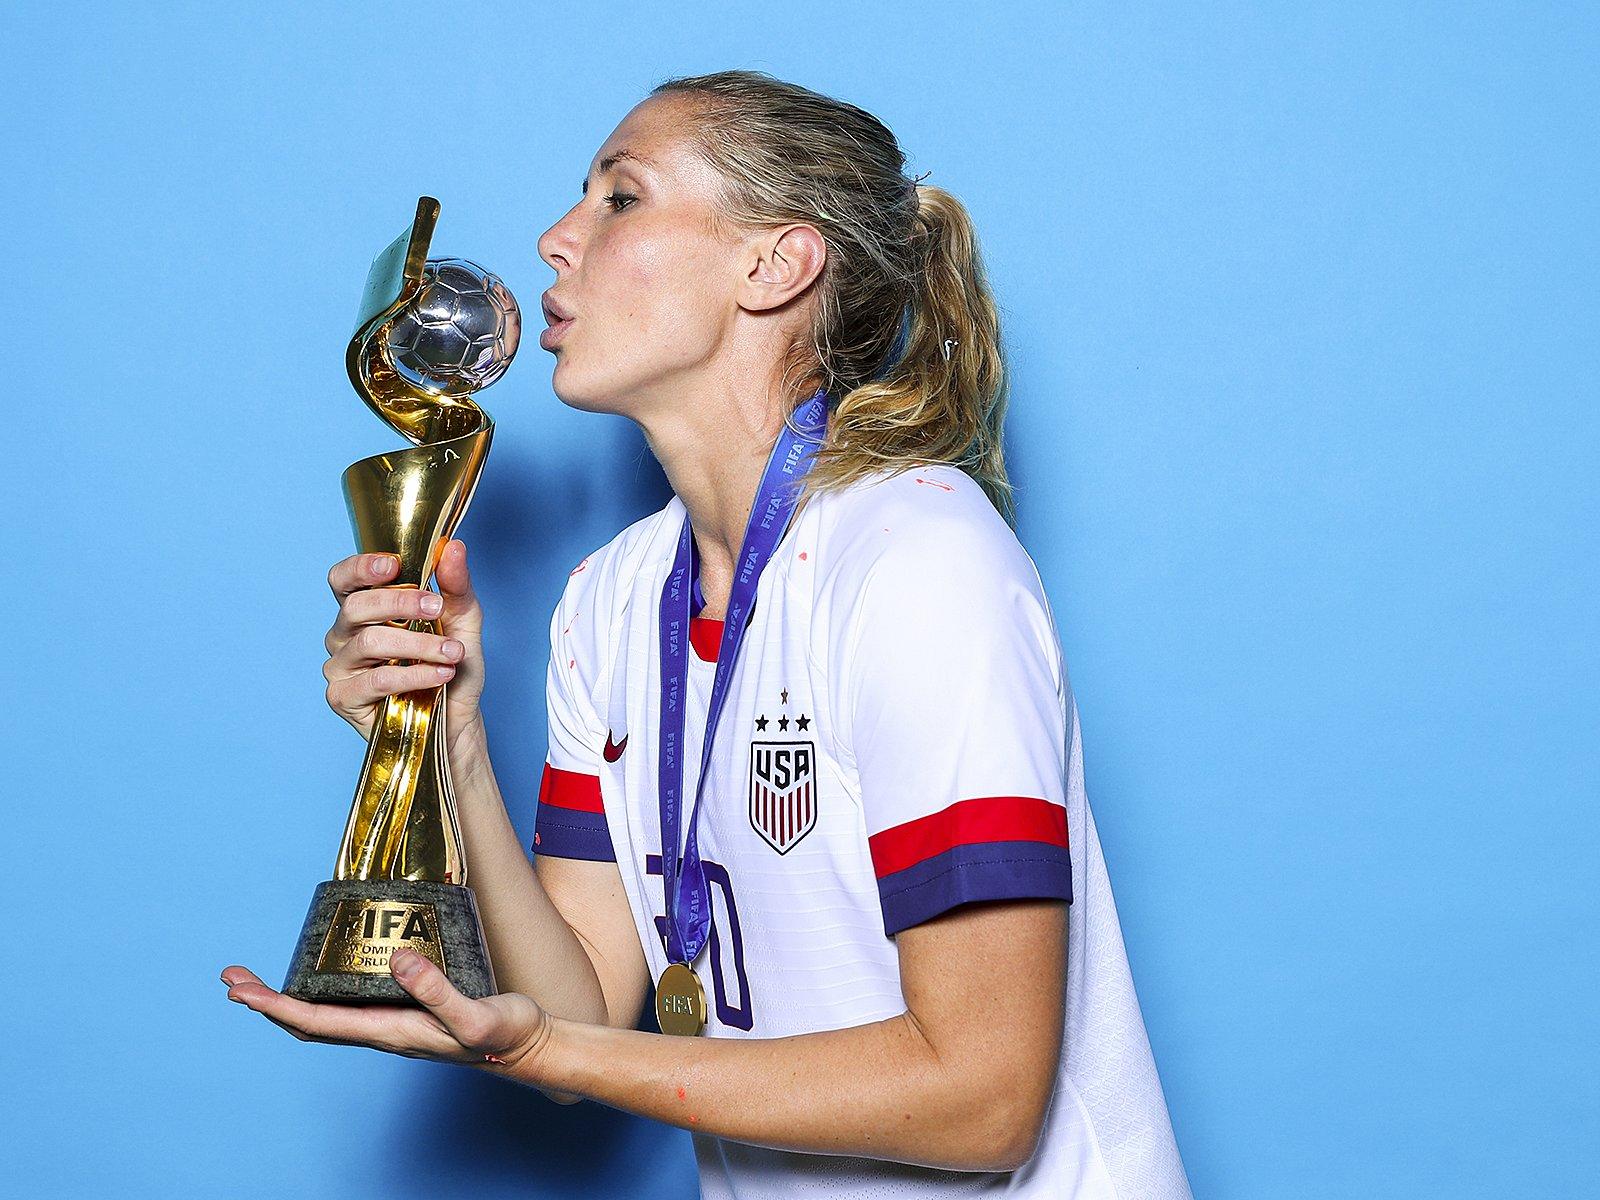 USWNT wins Women's World Cup: Players pose with trophy